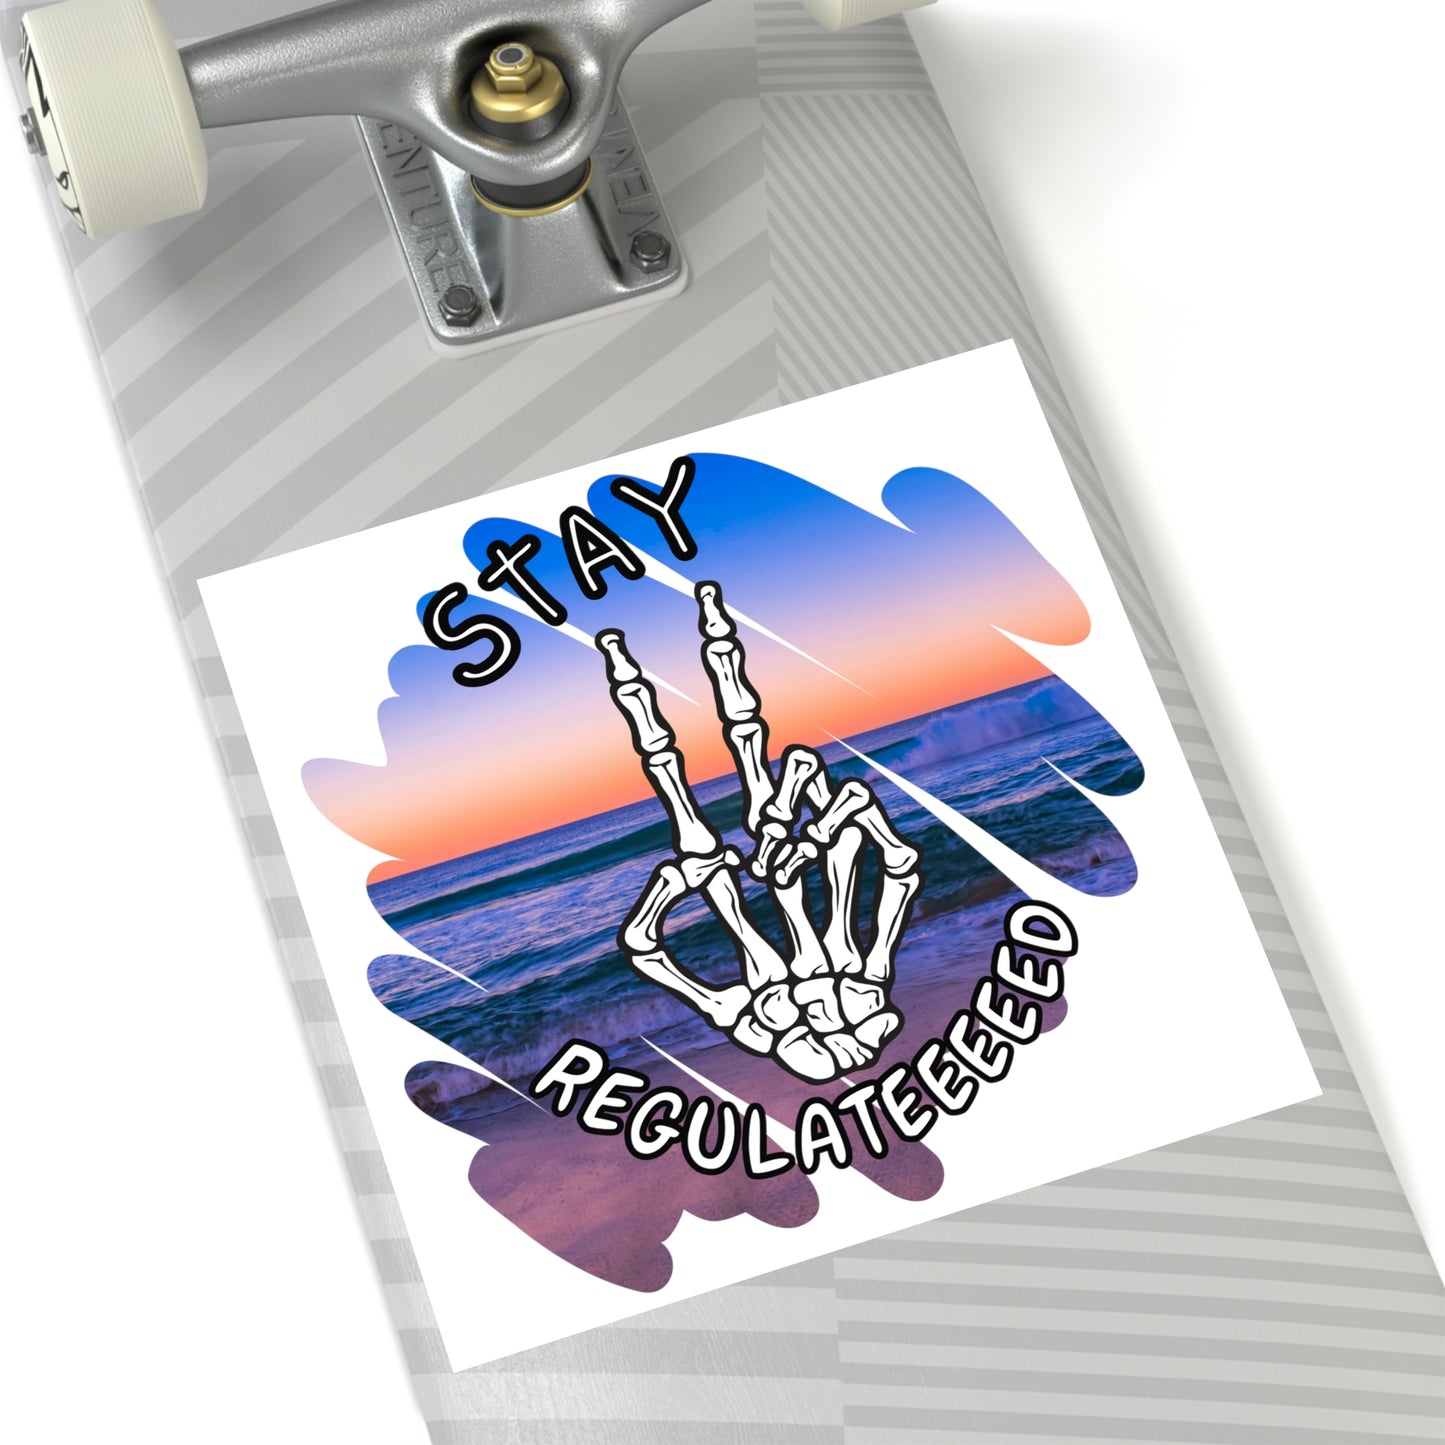 Stay Regulated [Gauthism Line] Square Stickers [Indoor\Outdoor]